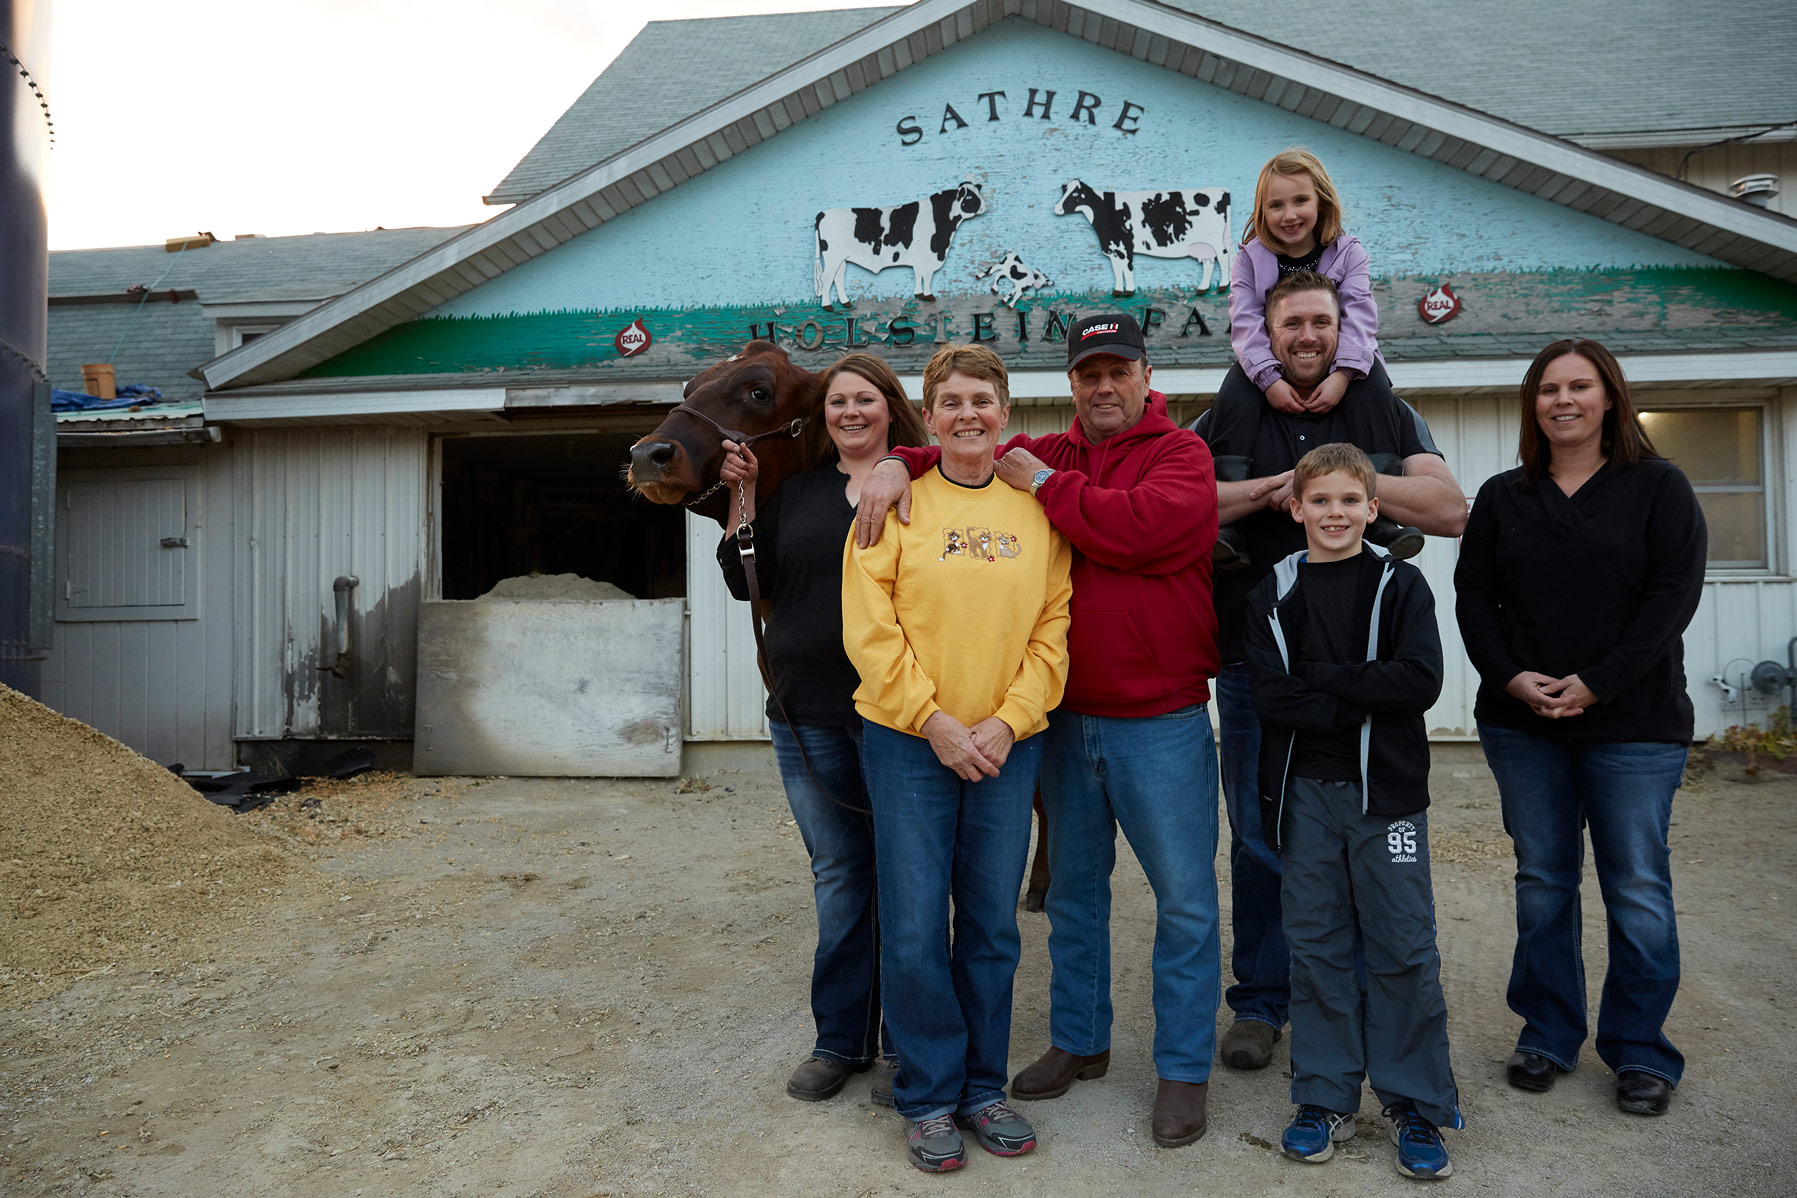 A real Catholic United family outside of their farm.